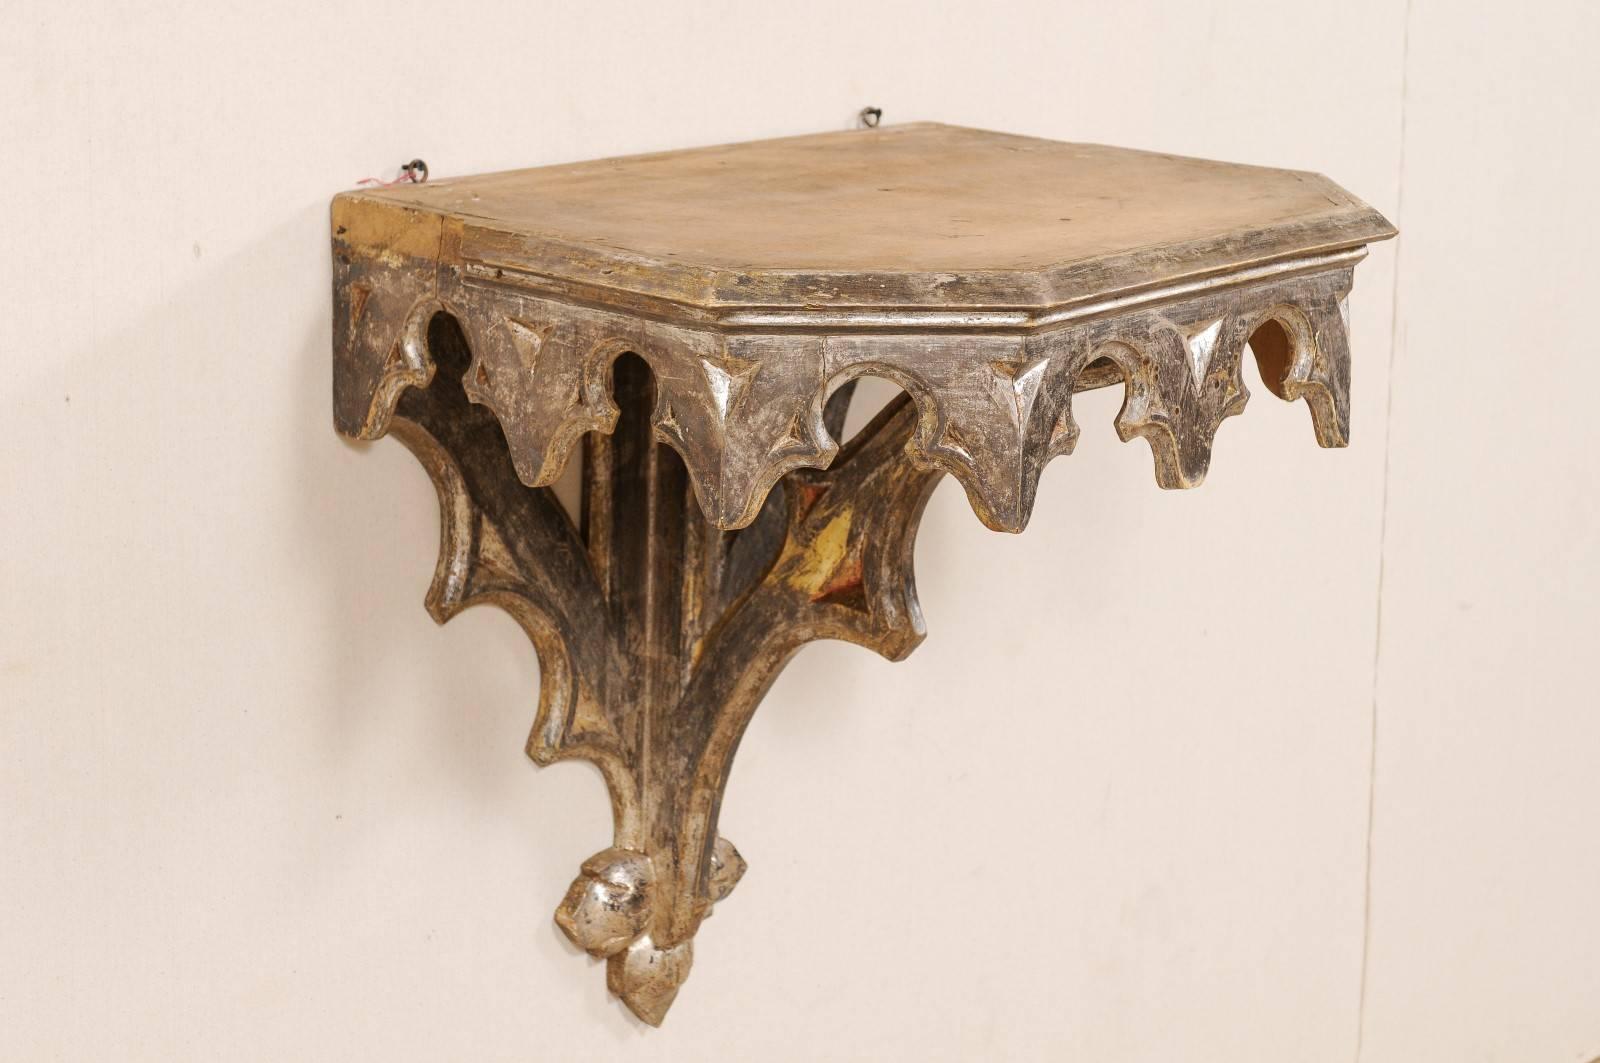 Wood Italian Wall-Mounted Small Table from the Early 19th Century, Metallic Accent